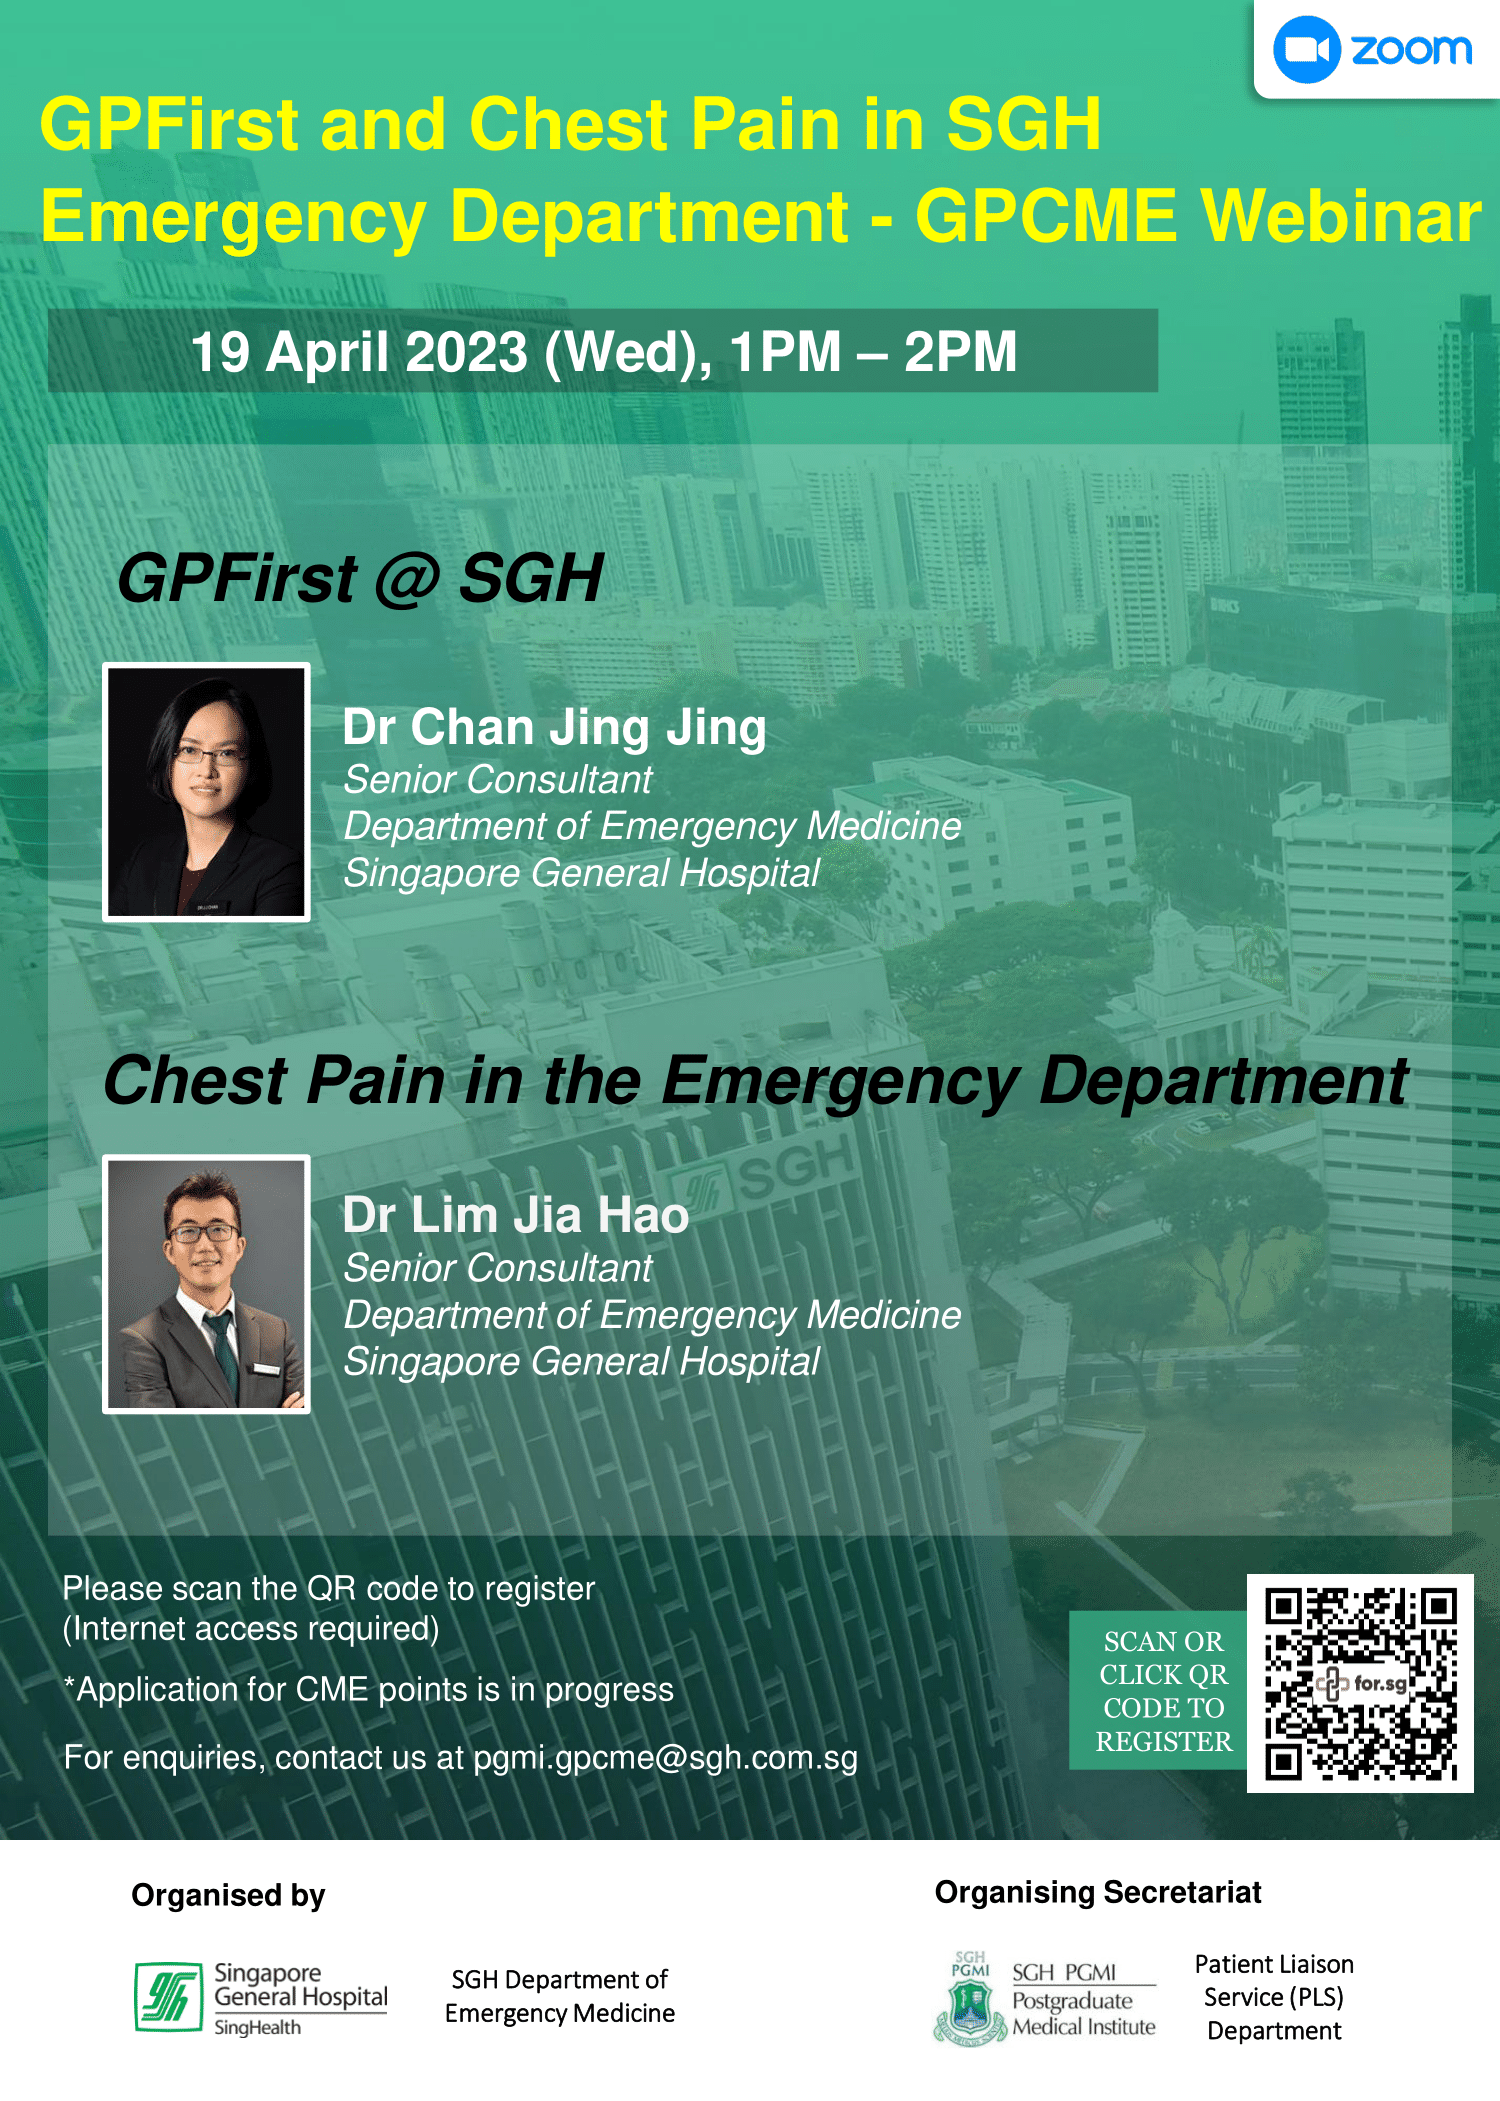 19 April 2023 GPCME Webinar - GPFirst and Chest Pain in SGH Emergency Department-1.png